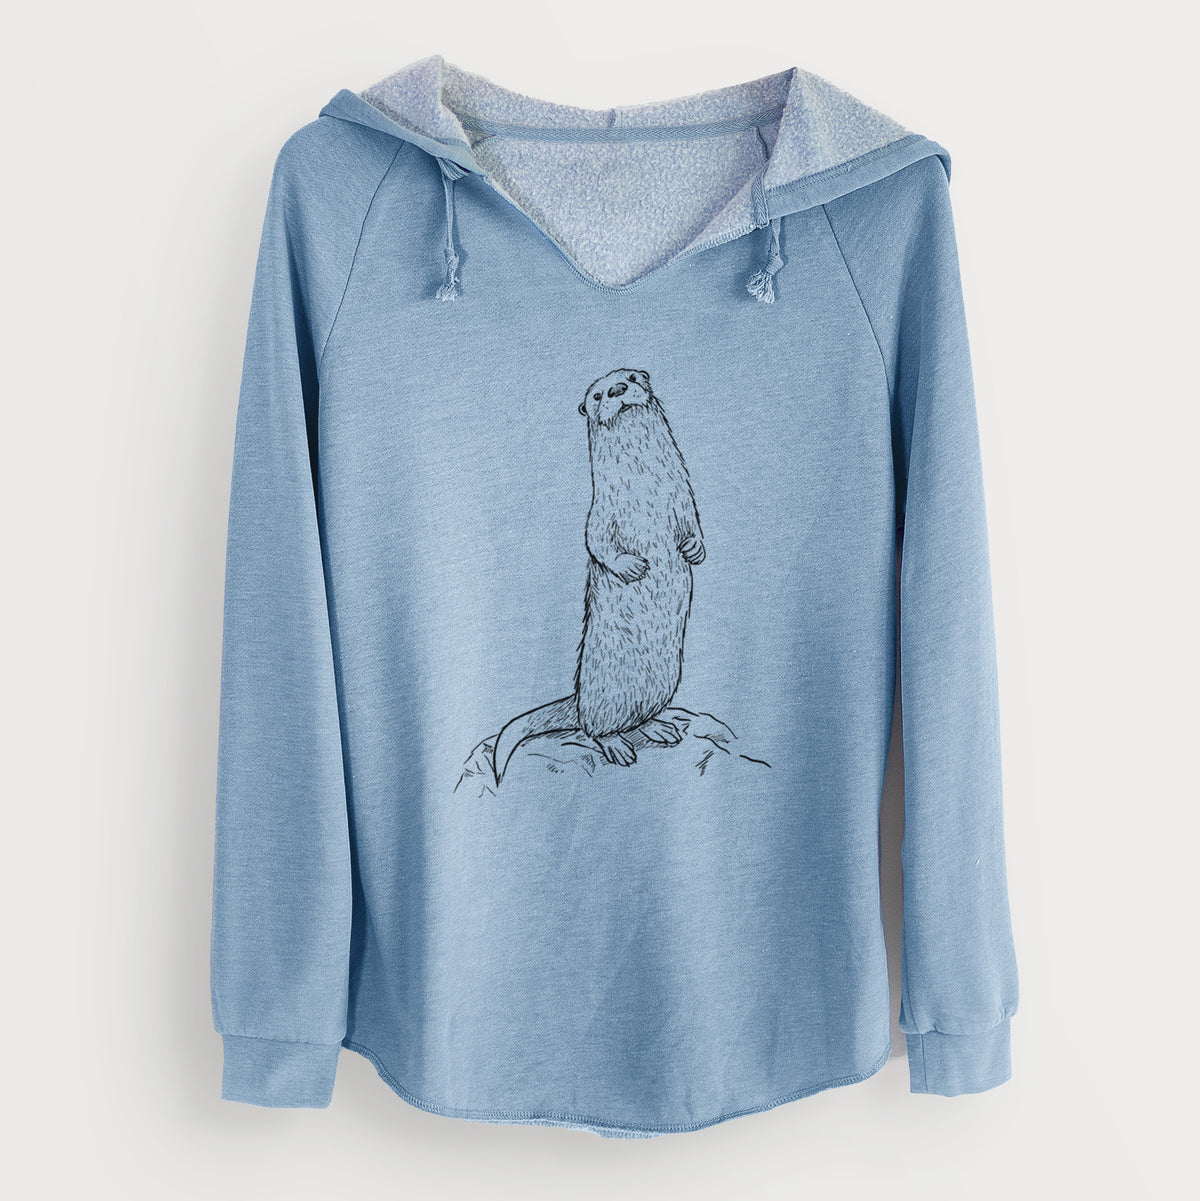 North American River Otter - Lontra canadensis - Cali Wave Hooded Sweatshirt